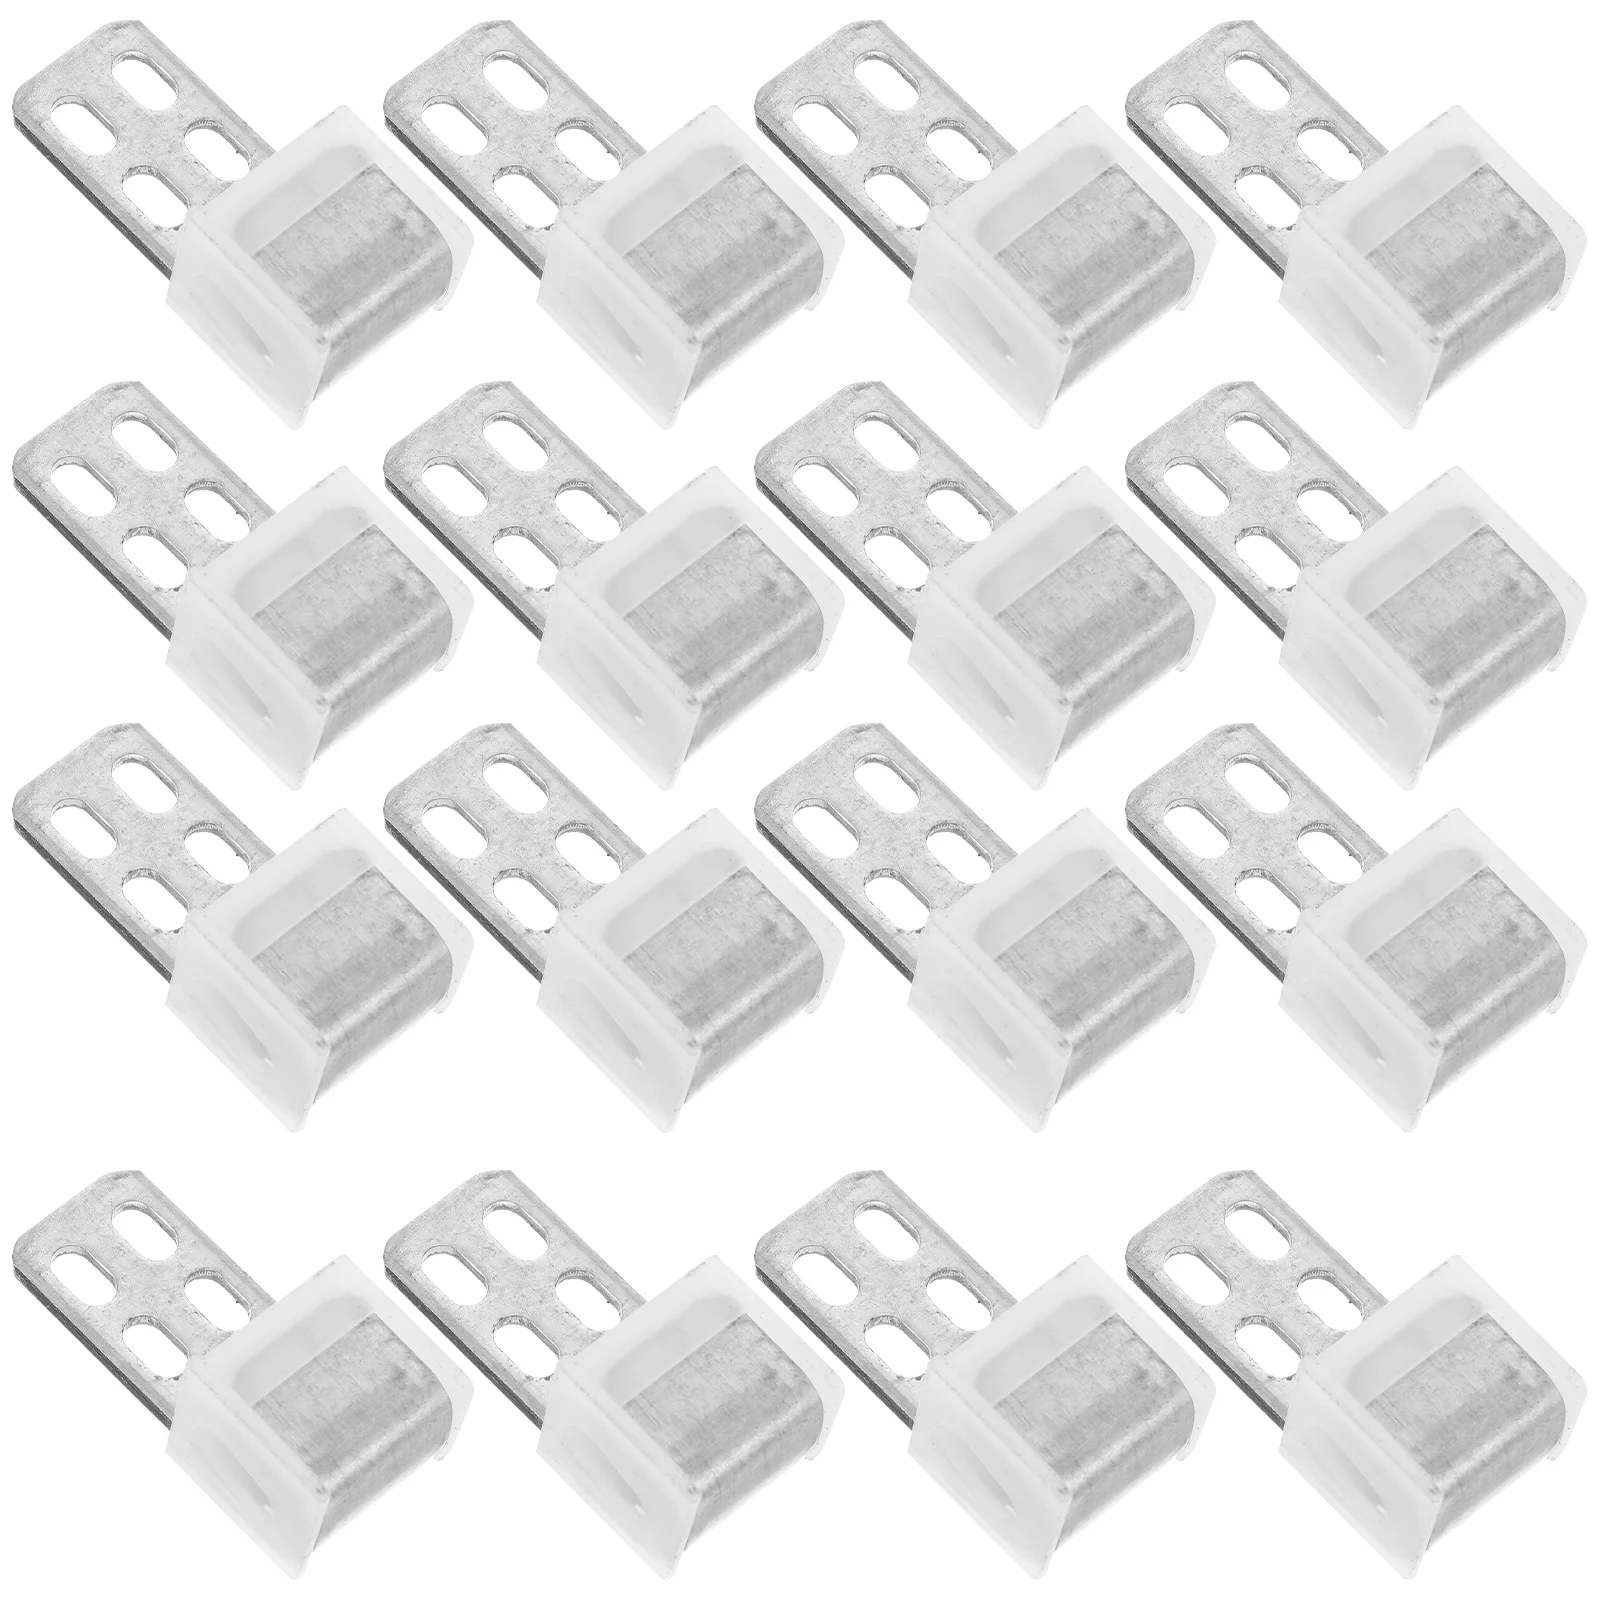 

20 Pcs Sofas Spring Clip Couch Repair Connector Kit Clips Rubber Support for Sagging Cushions Repairing Accessories